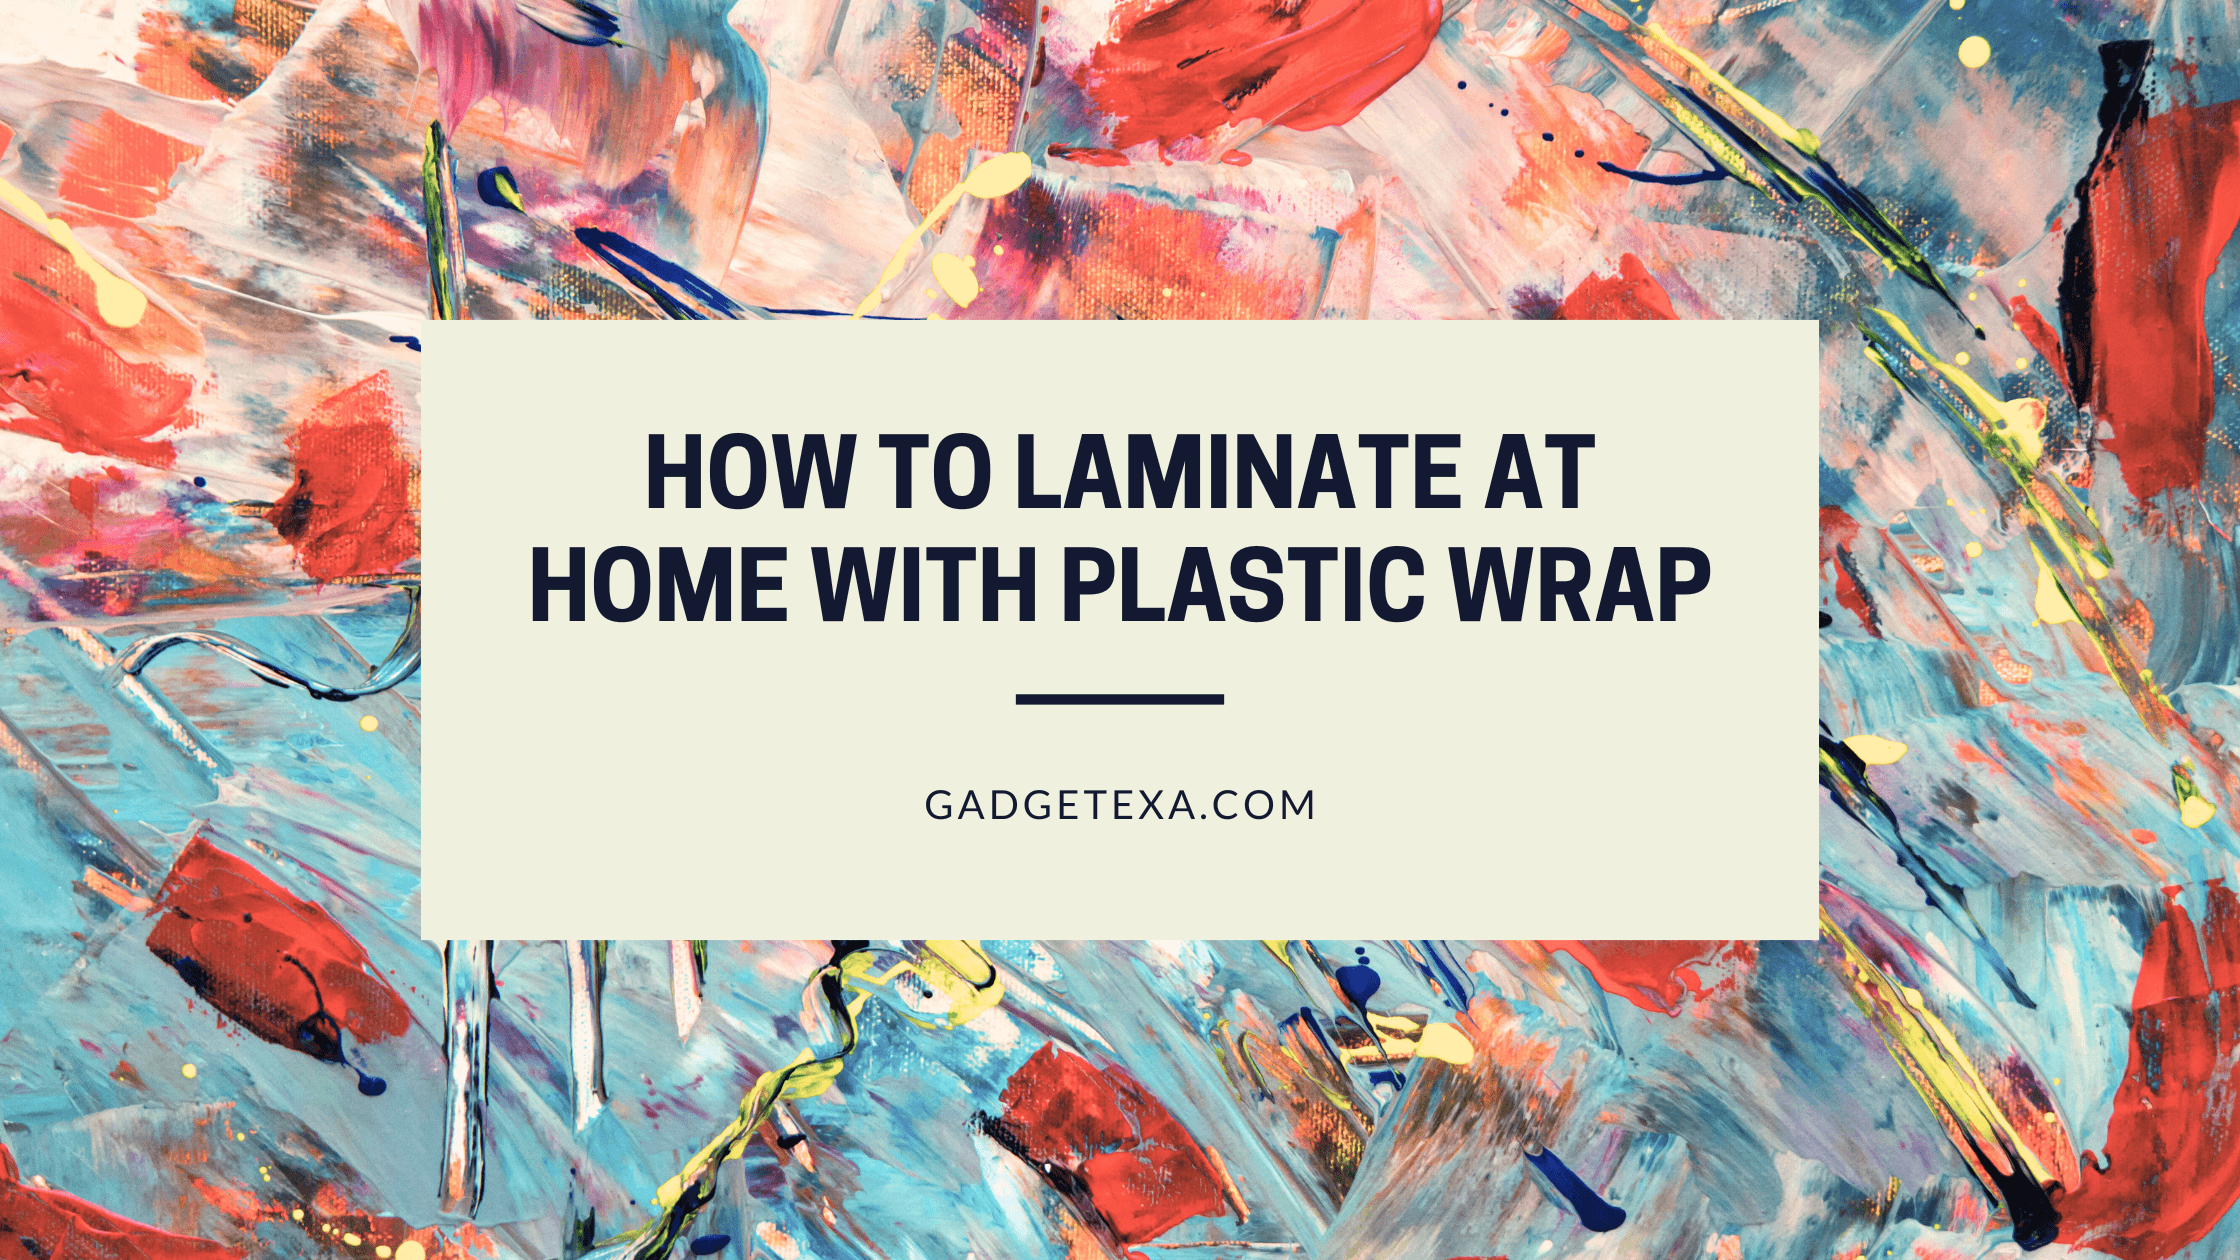 You are currently viewing How to laminate at home with plastic wrap